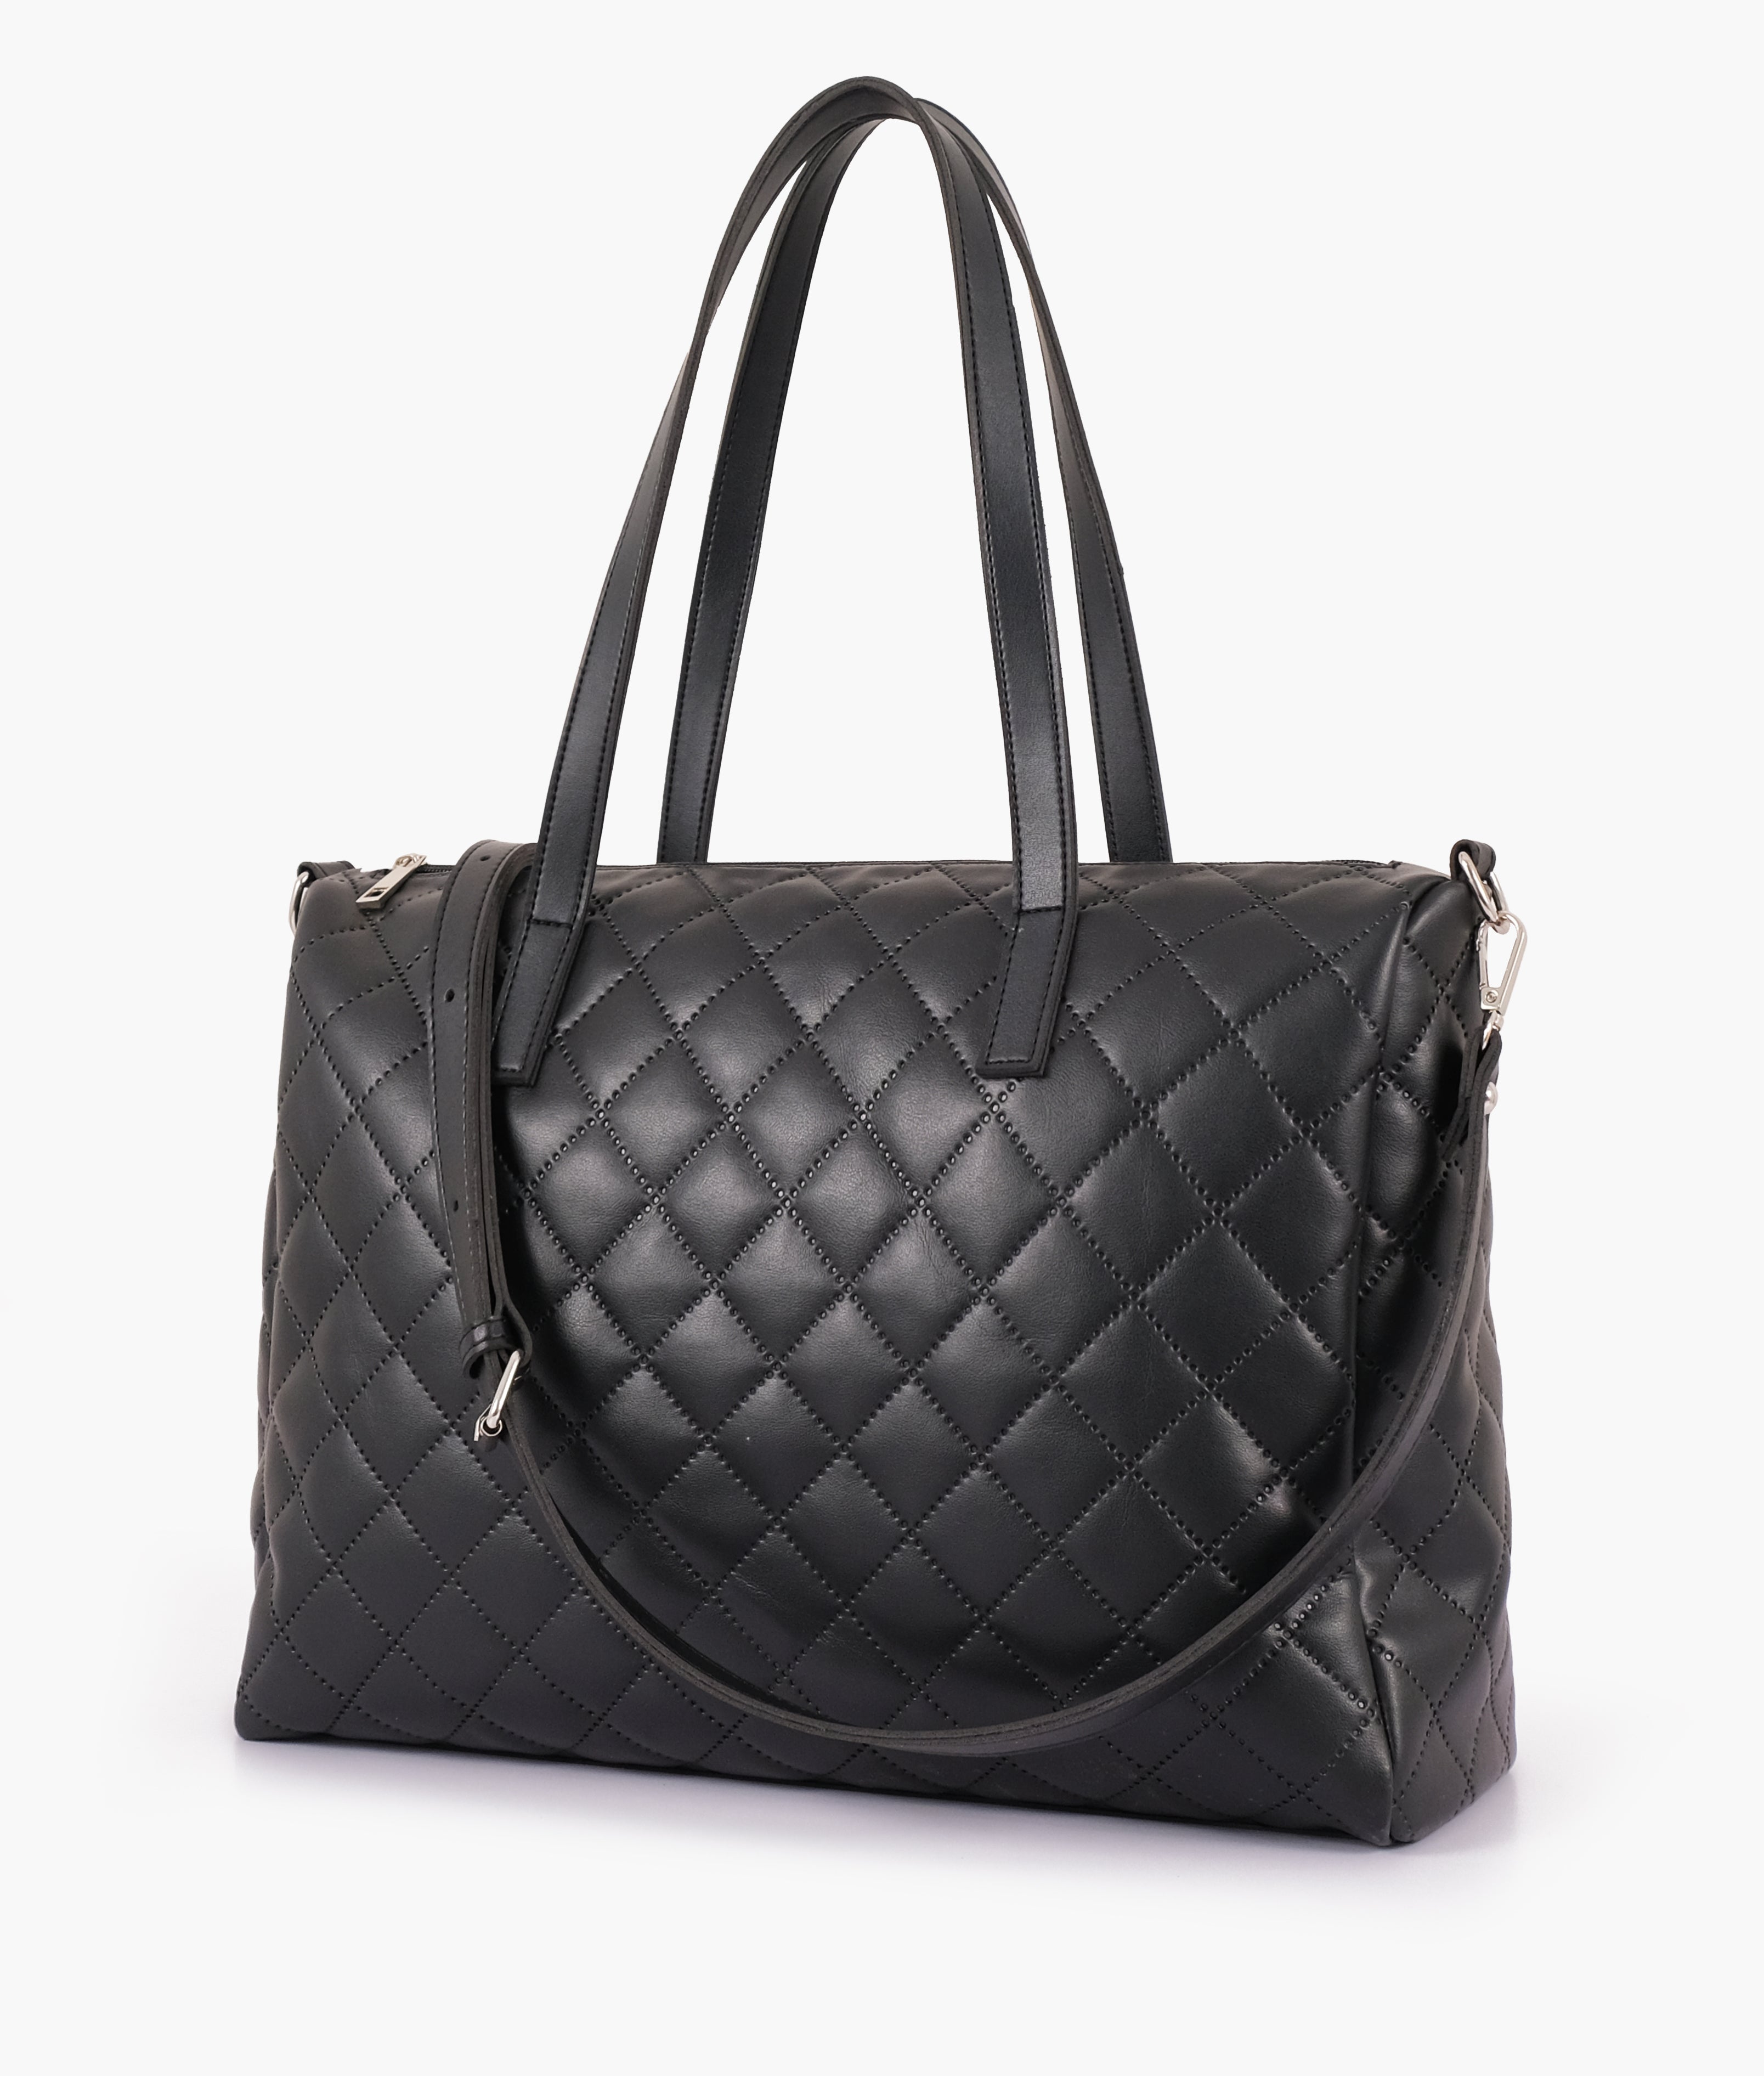 Black quilted carryall tote bag